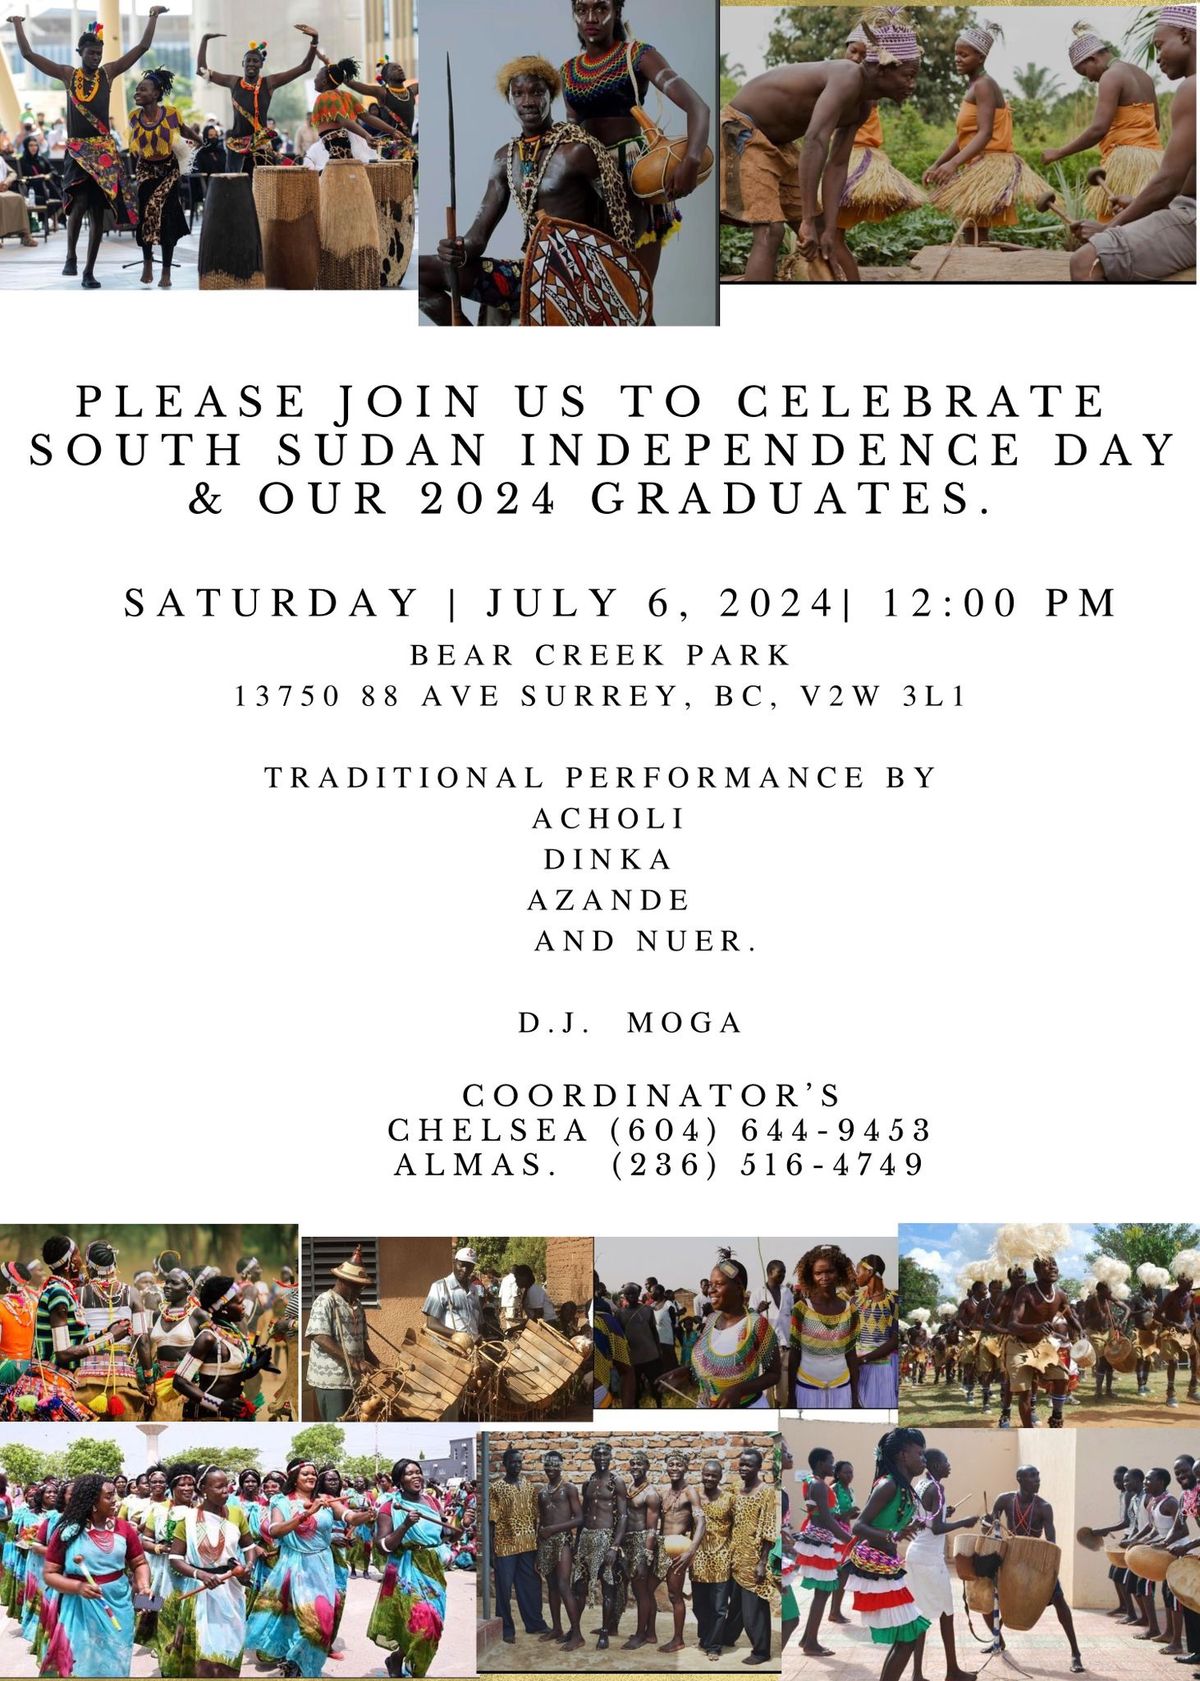 South Sudan Independence Day & our 2024 Graduates 